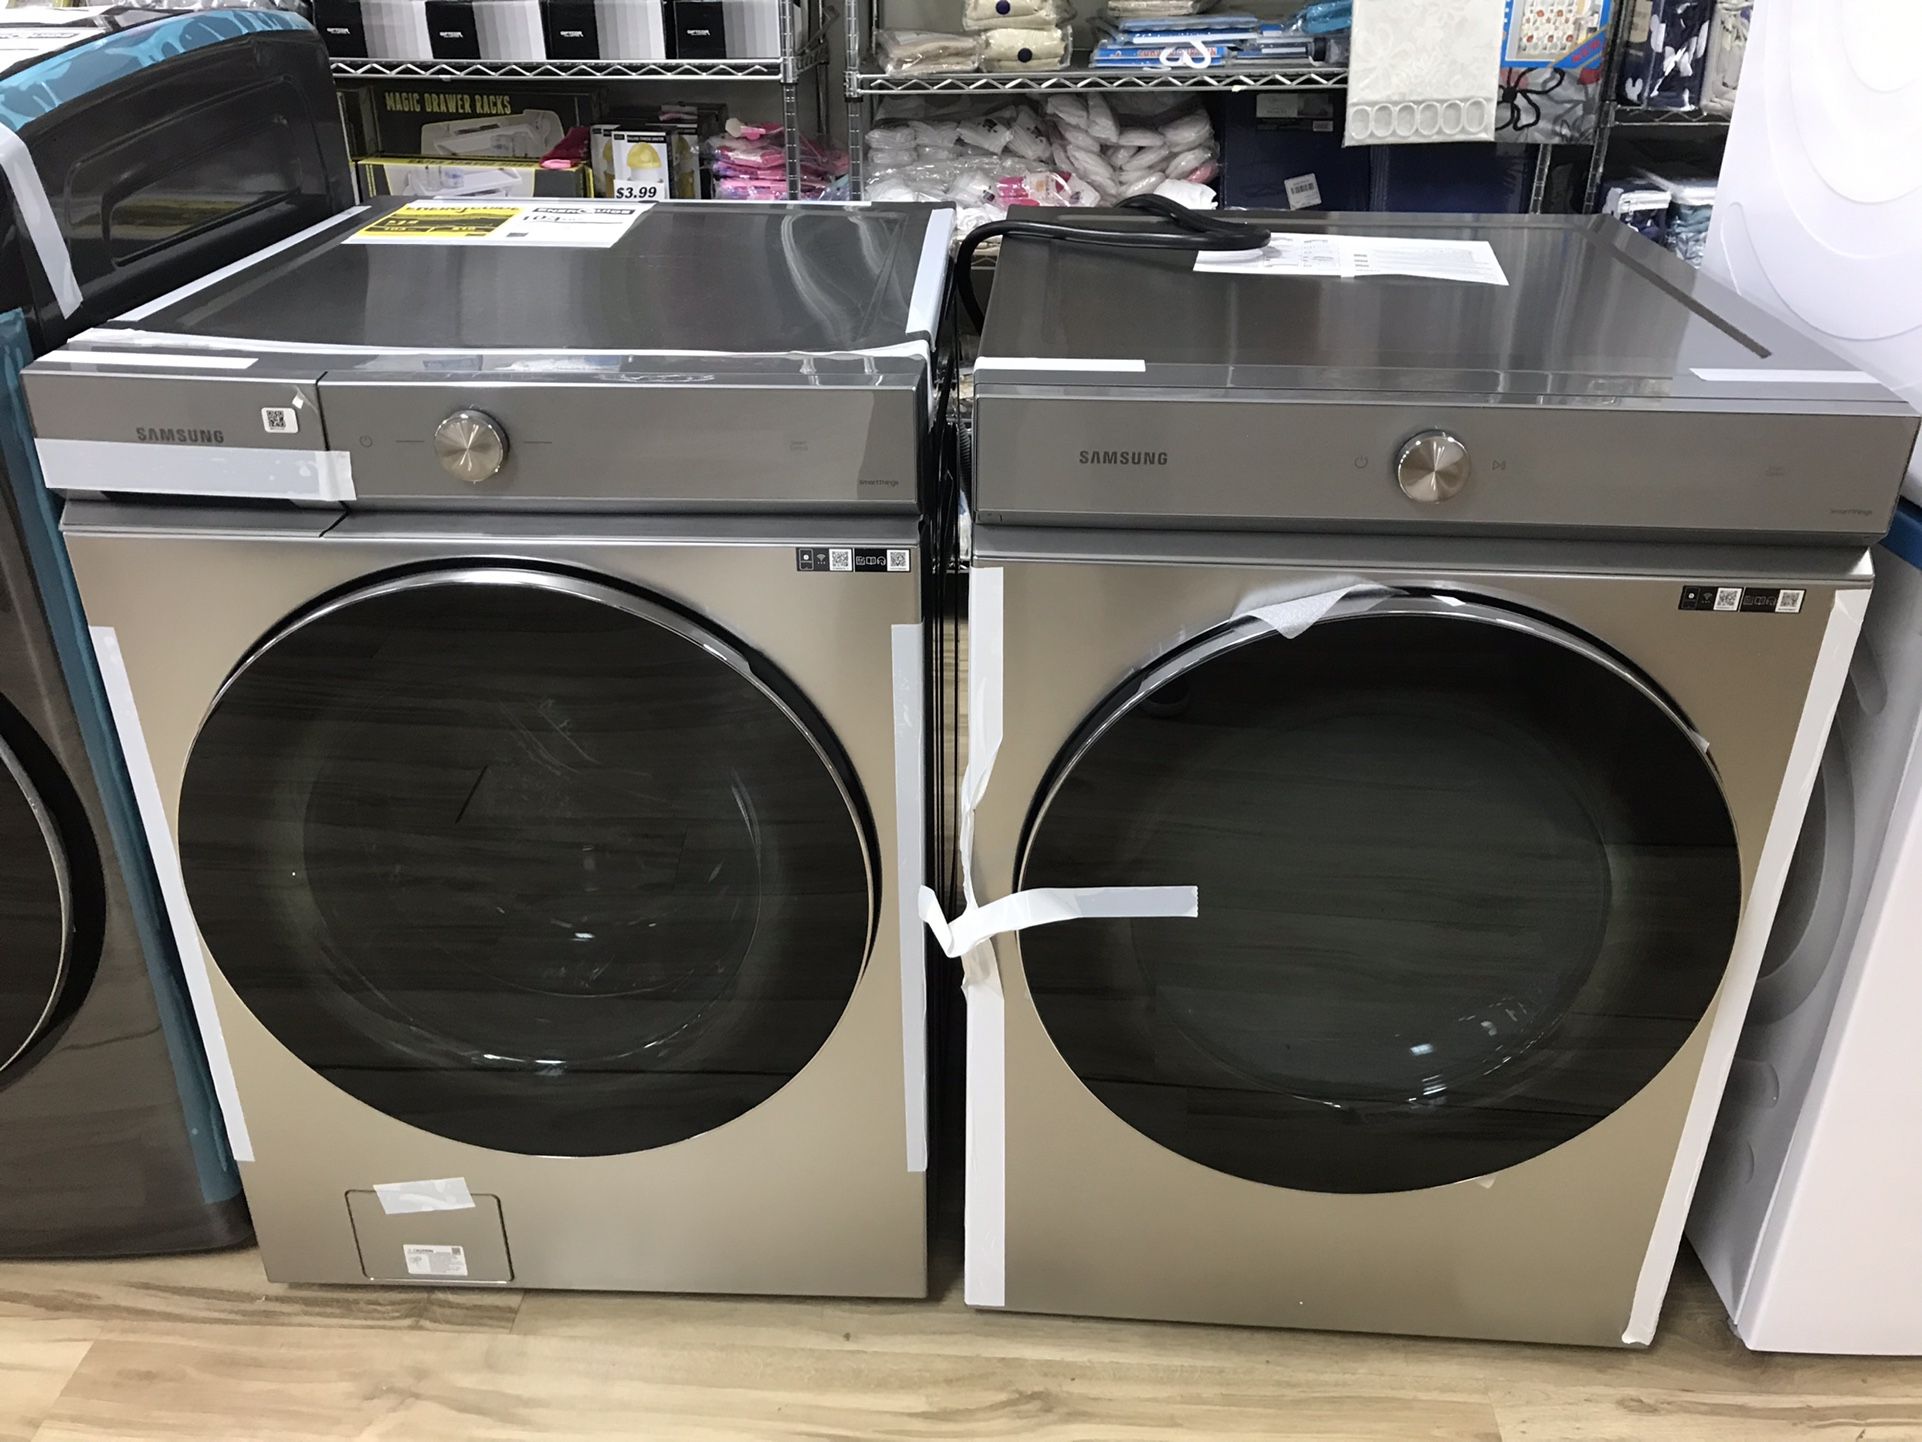 Samsung Bespoke washer and dryer set in Gold